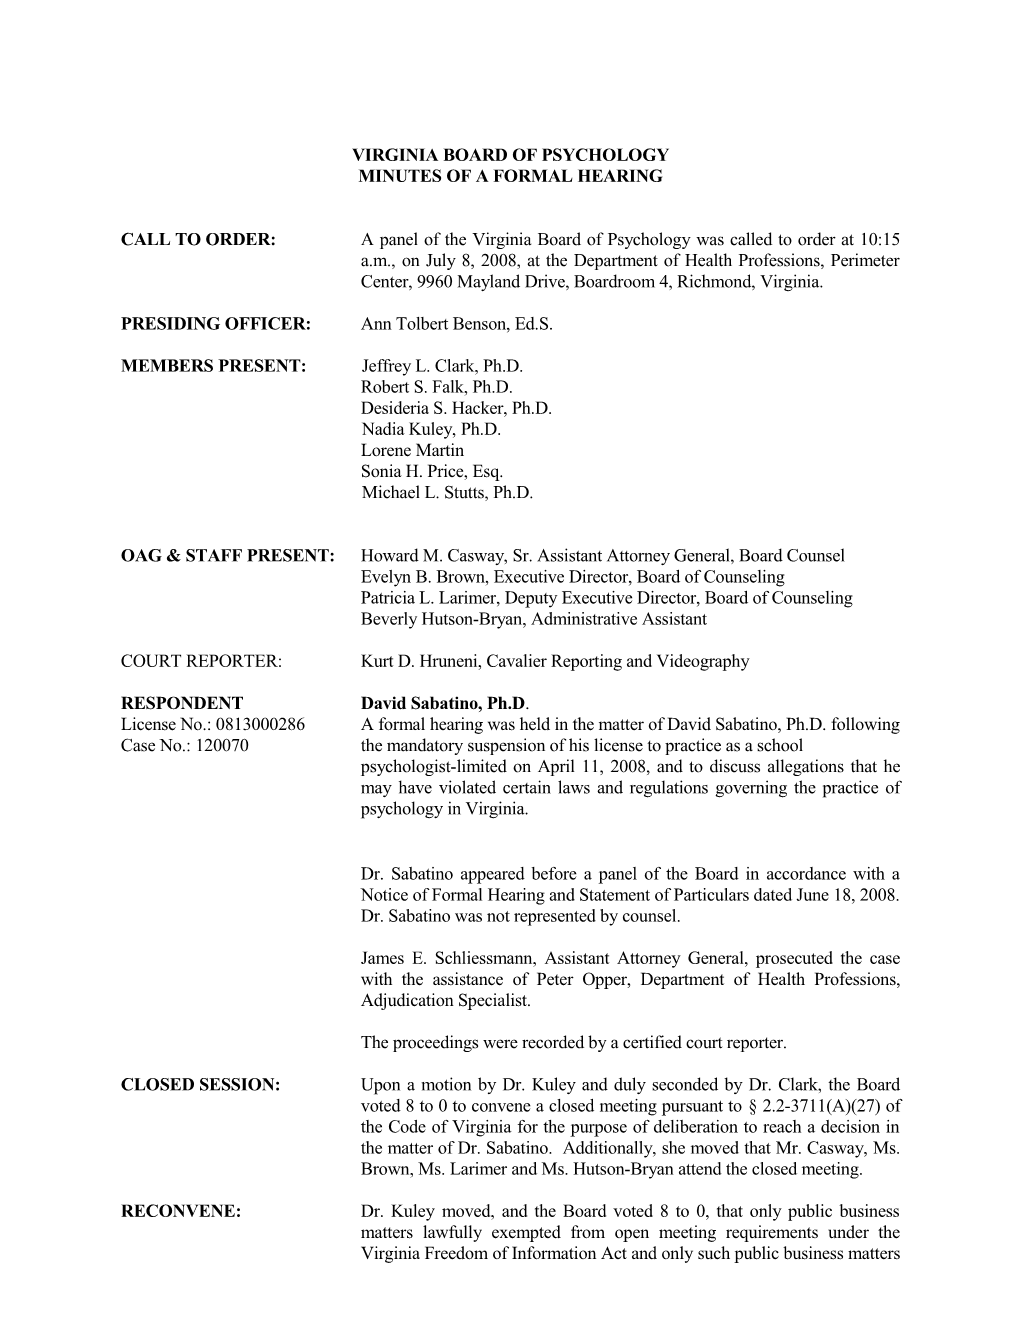 Board of Psychology - Formal Hearing Minutes - July 8, 2008